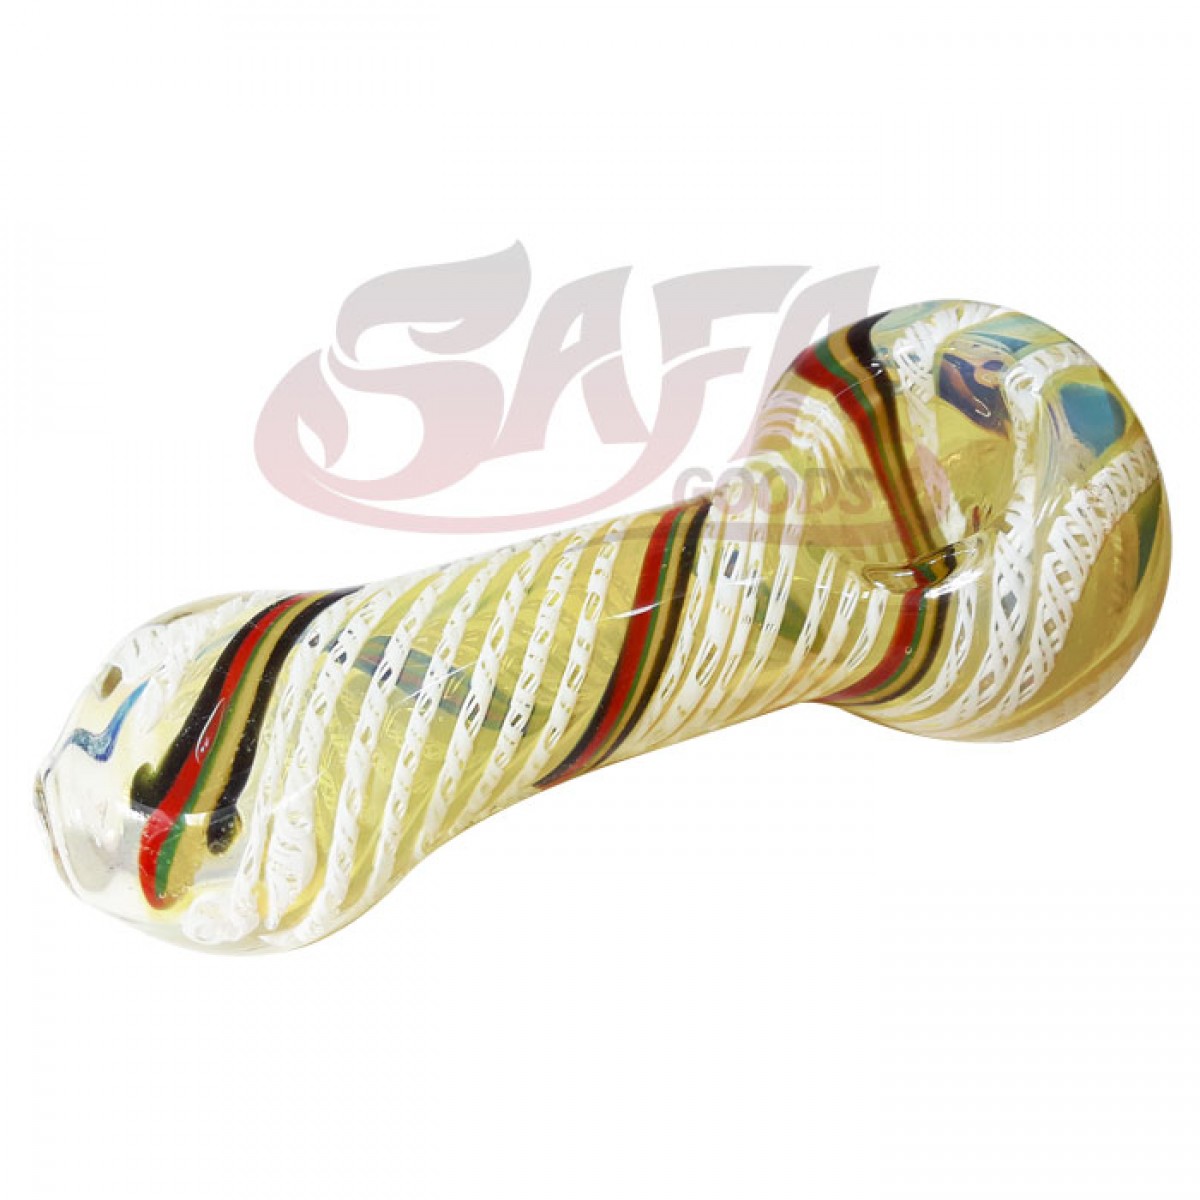 4 Inch Glass Hand Pipes - Heavy Fume/Cane